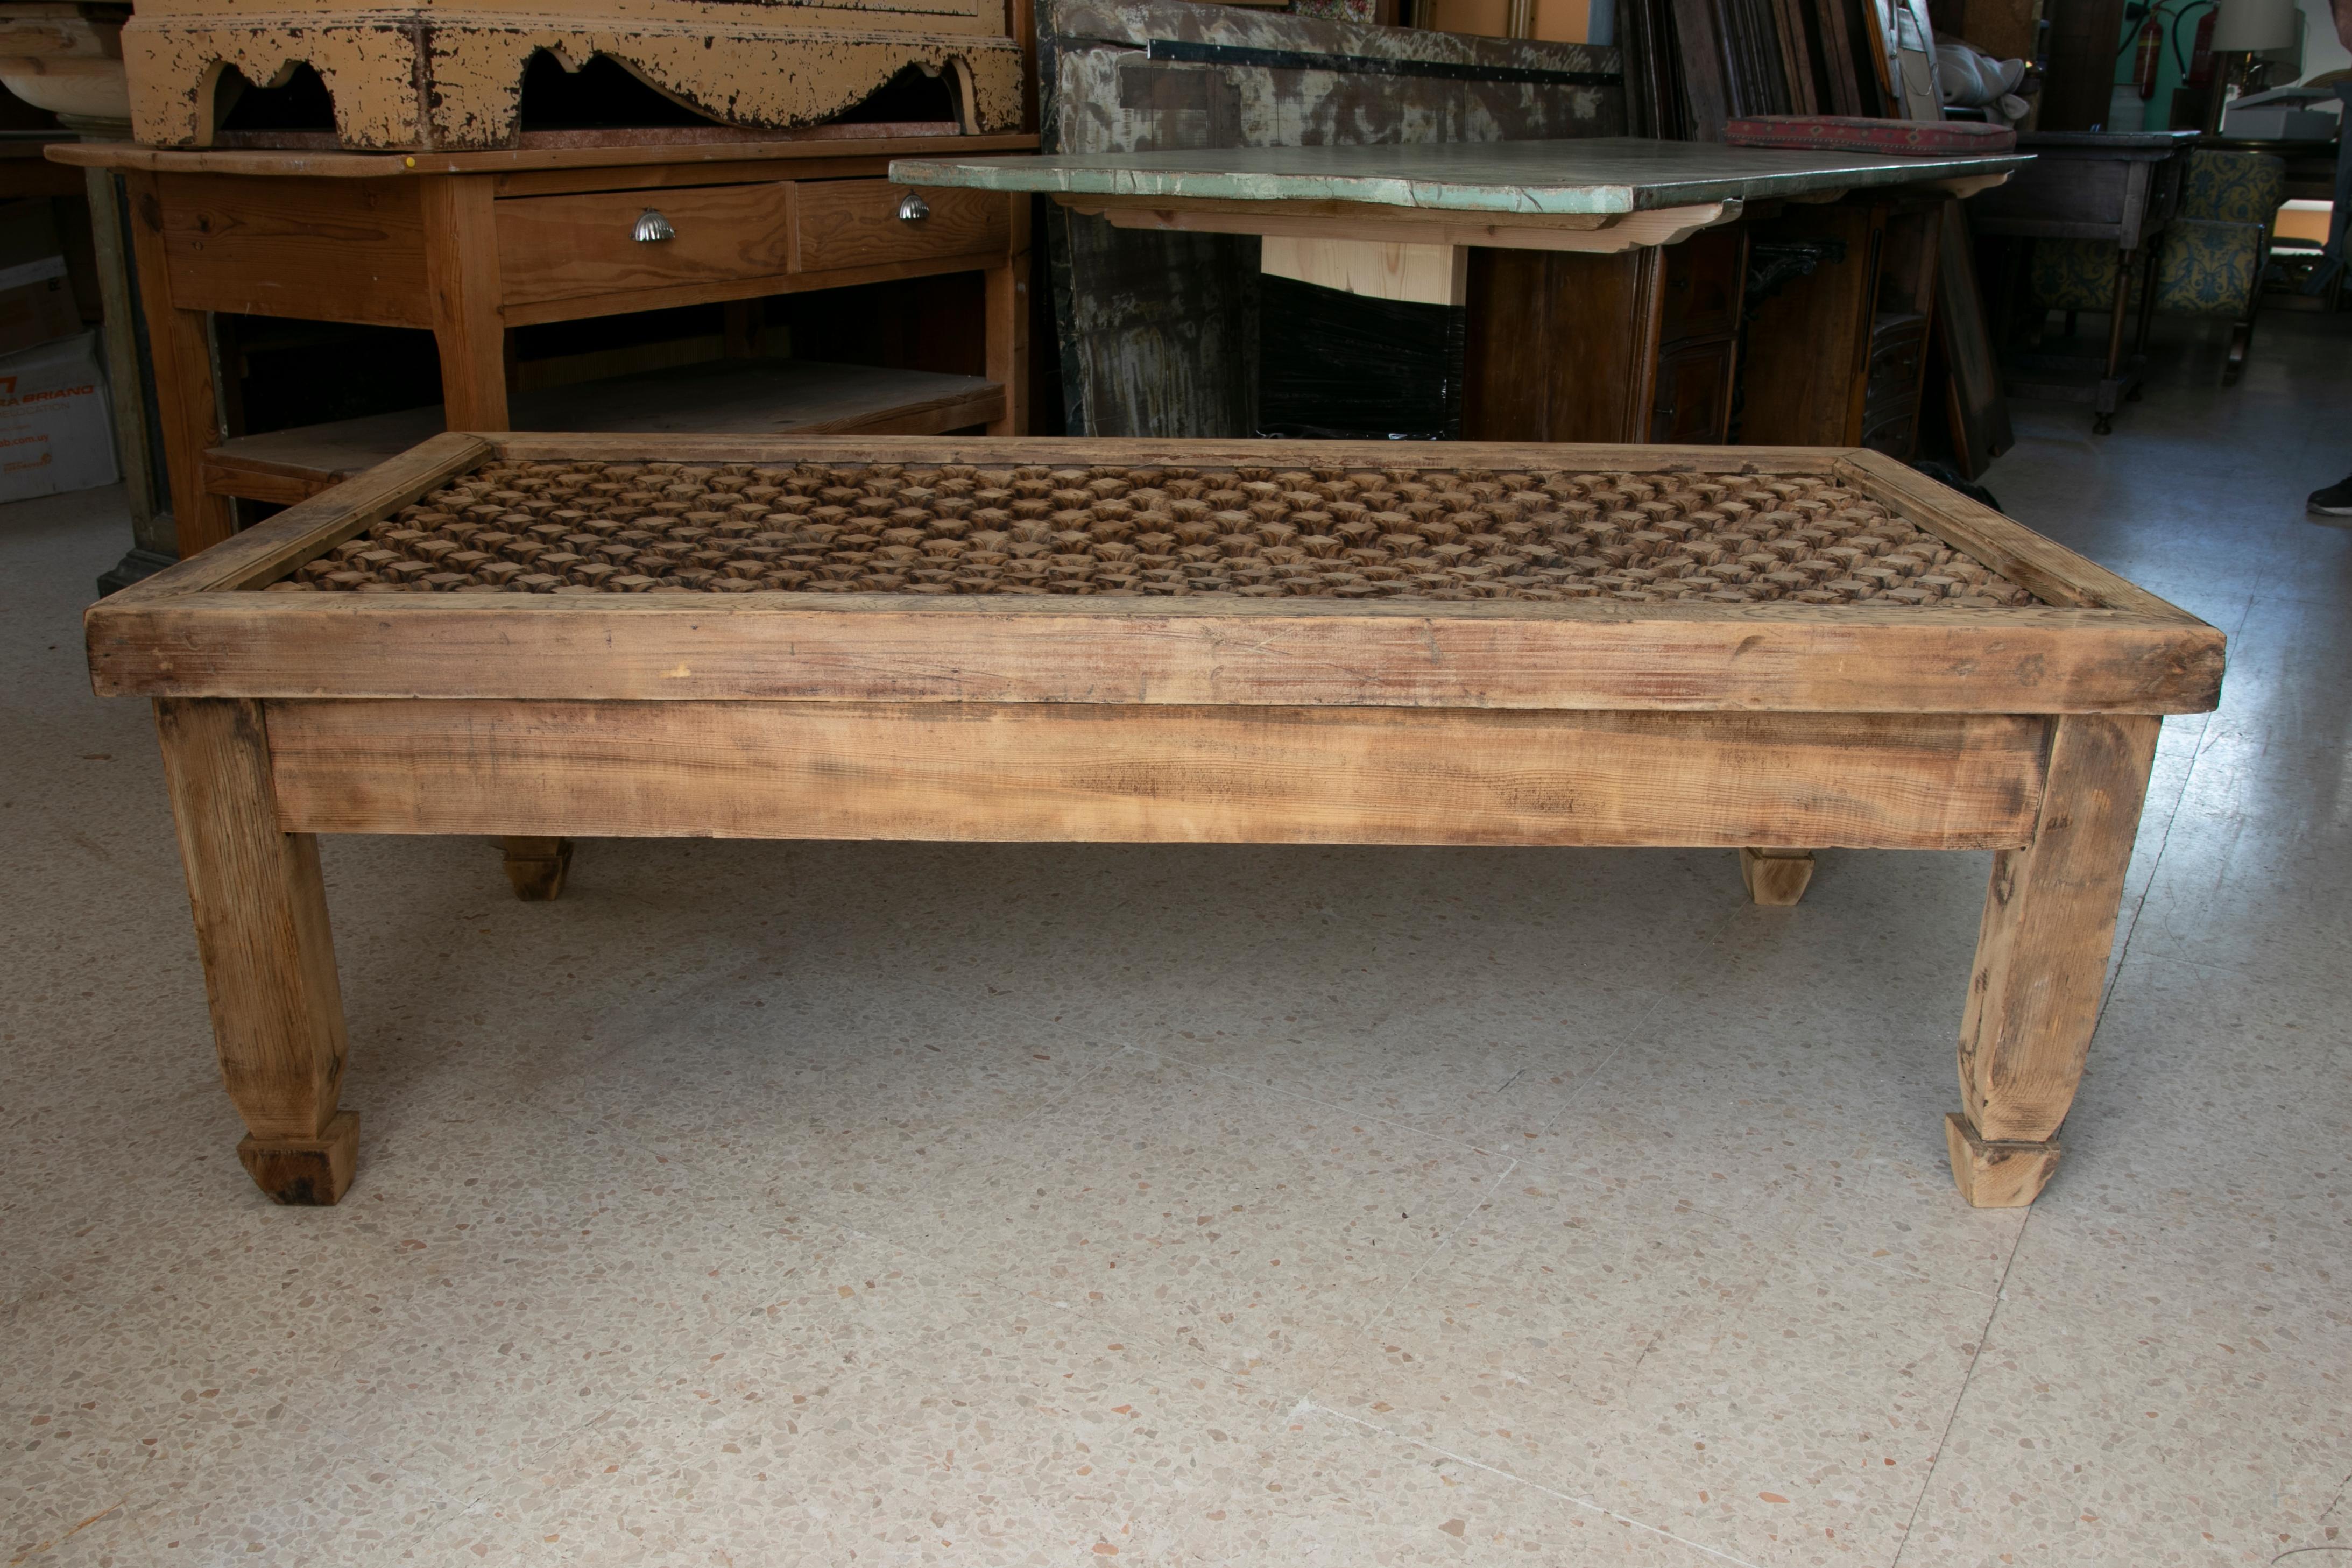 Hand-Carvedwooden coffee table with Lattice on Top.